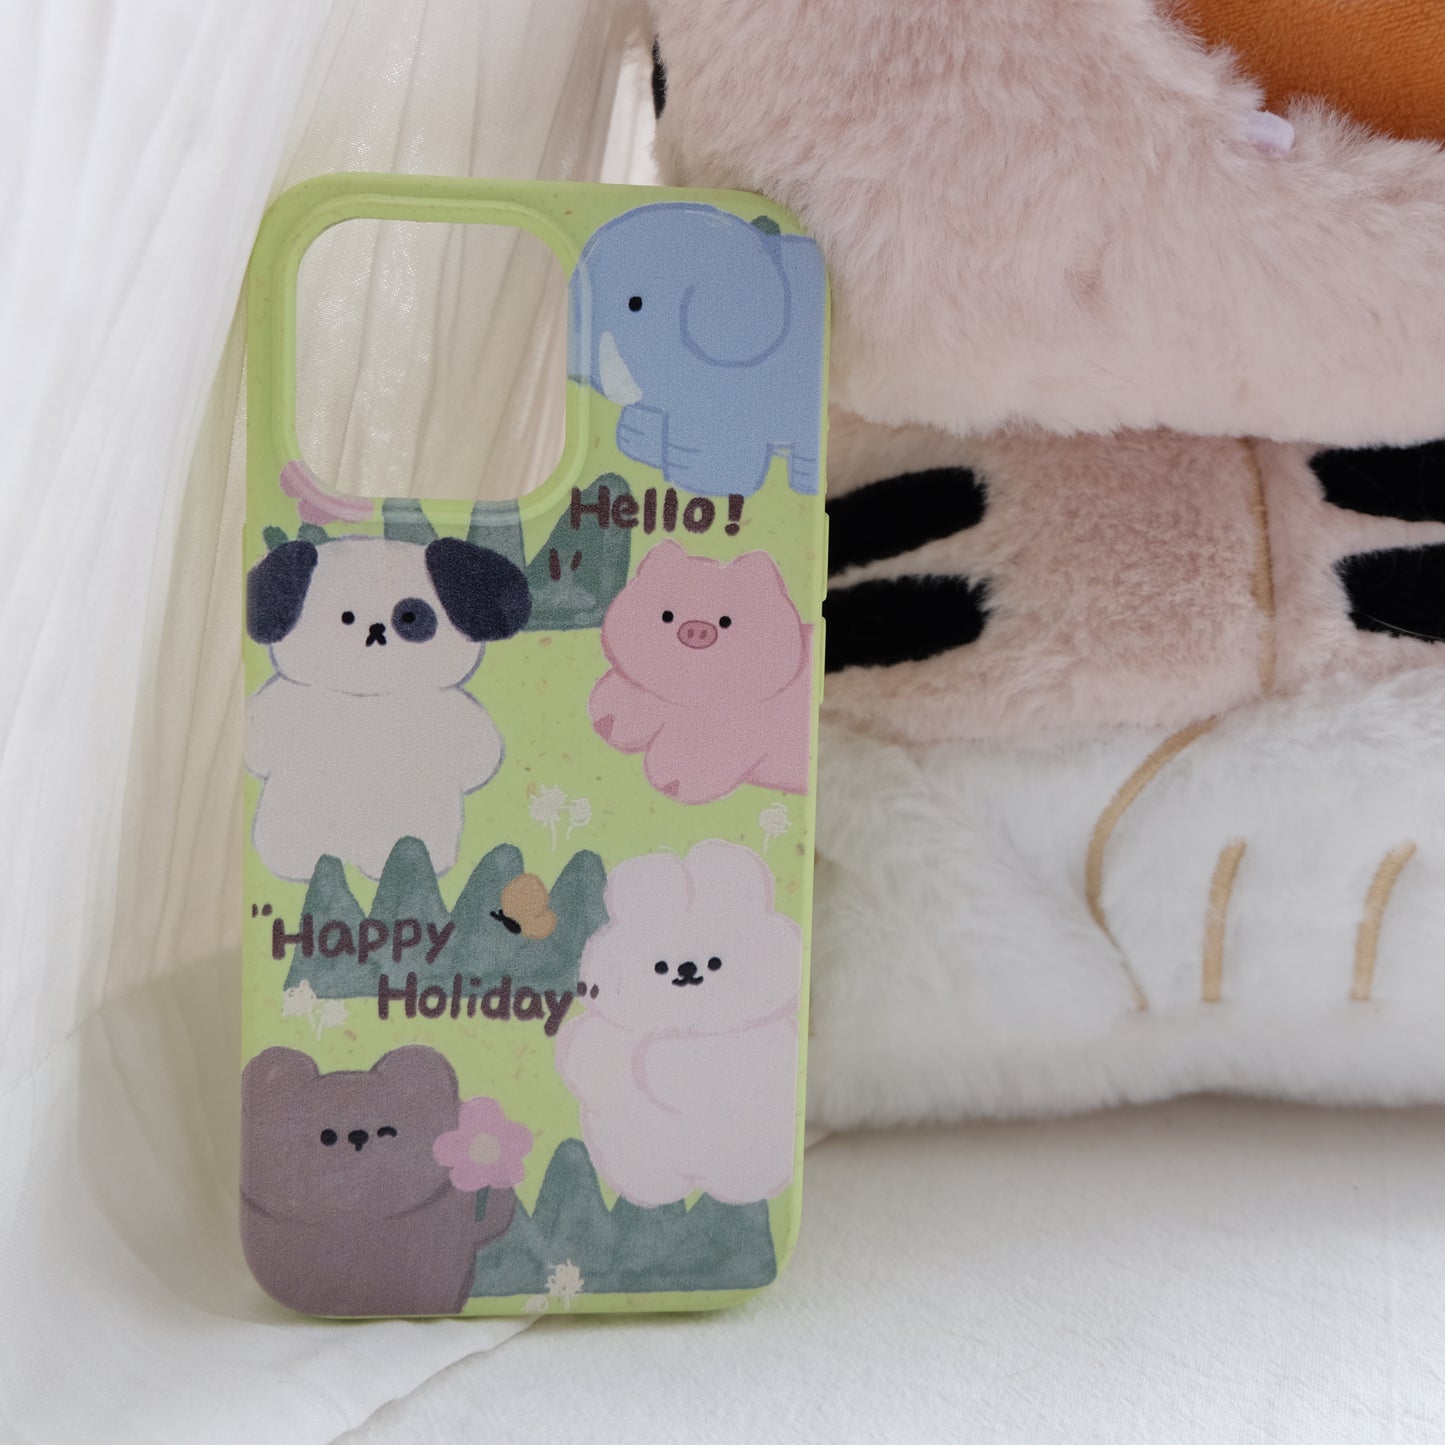 Happy holiday my friends degradable phone case